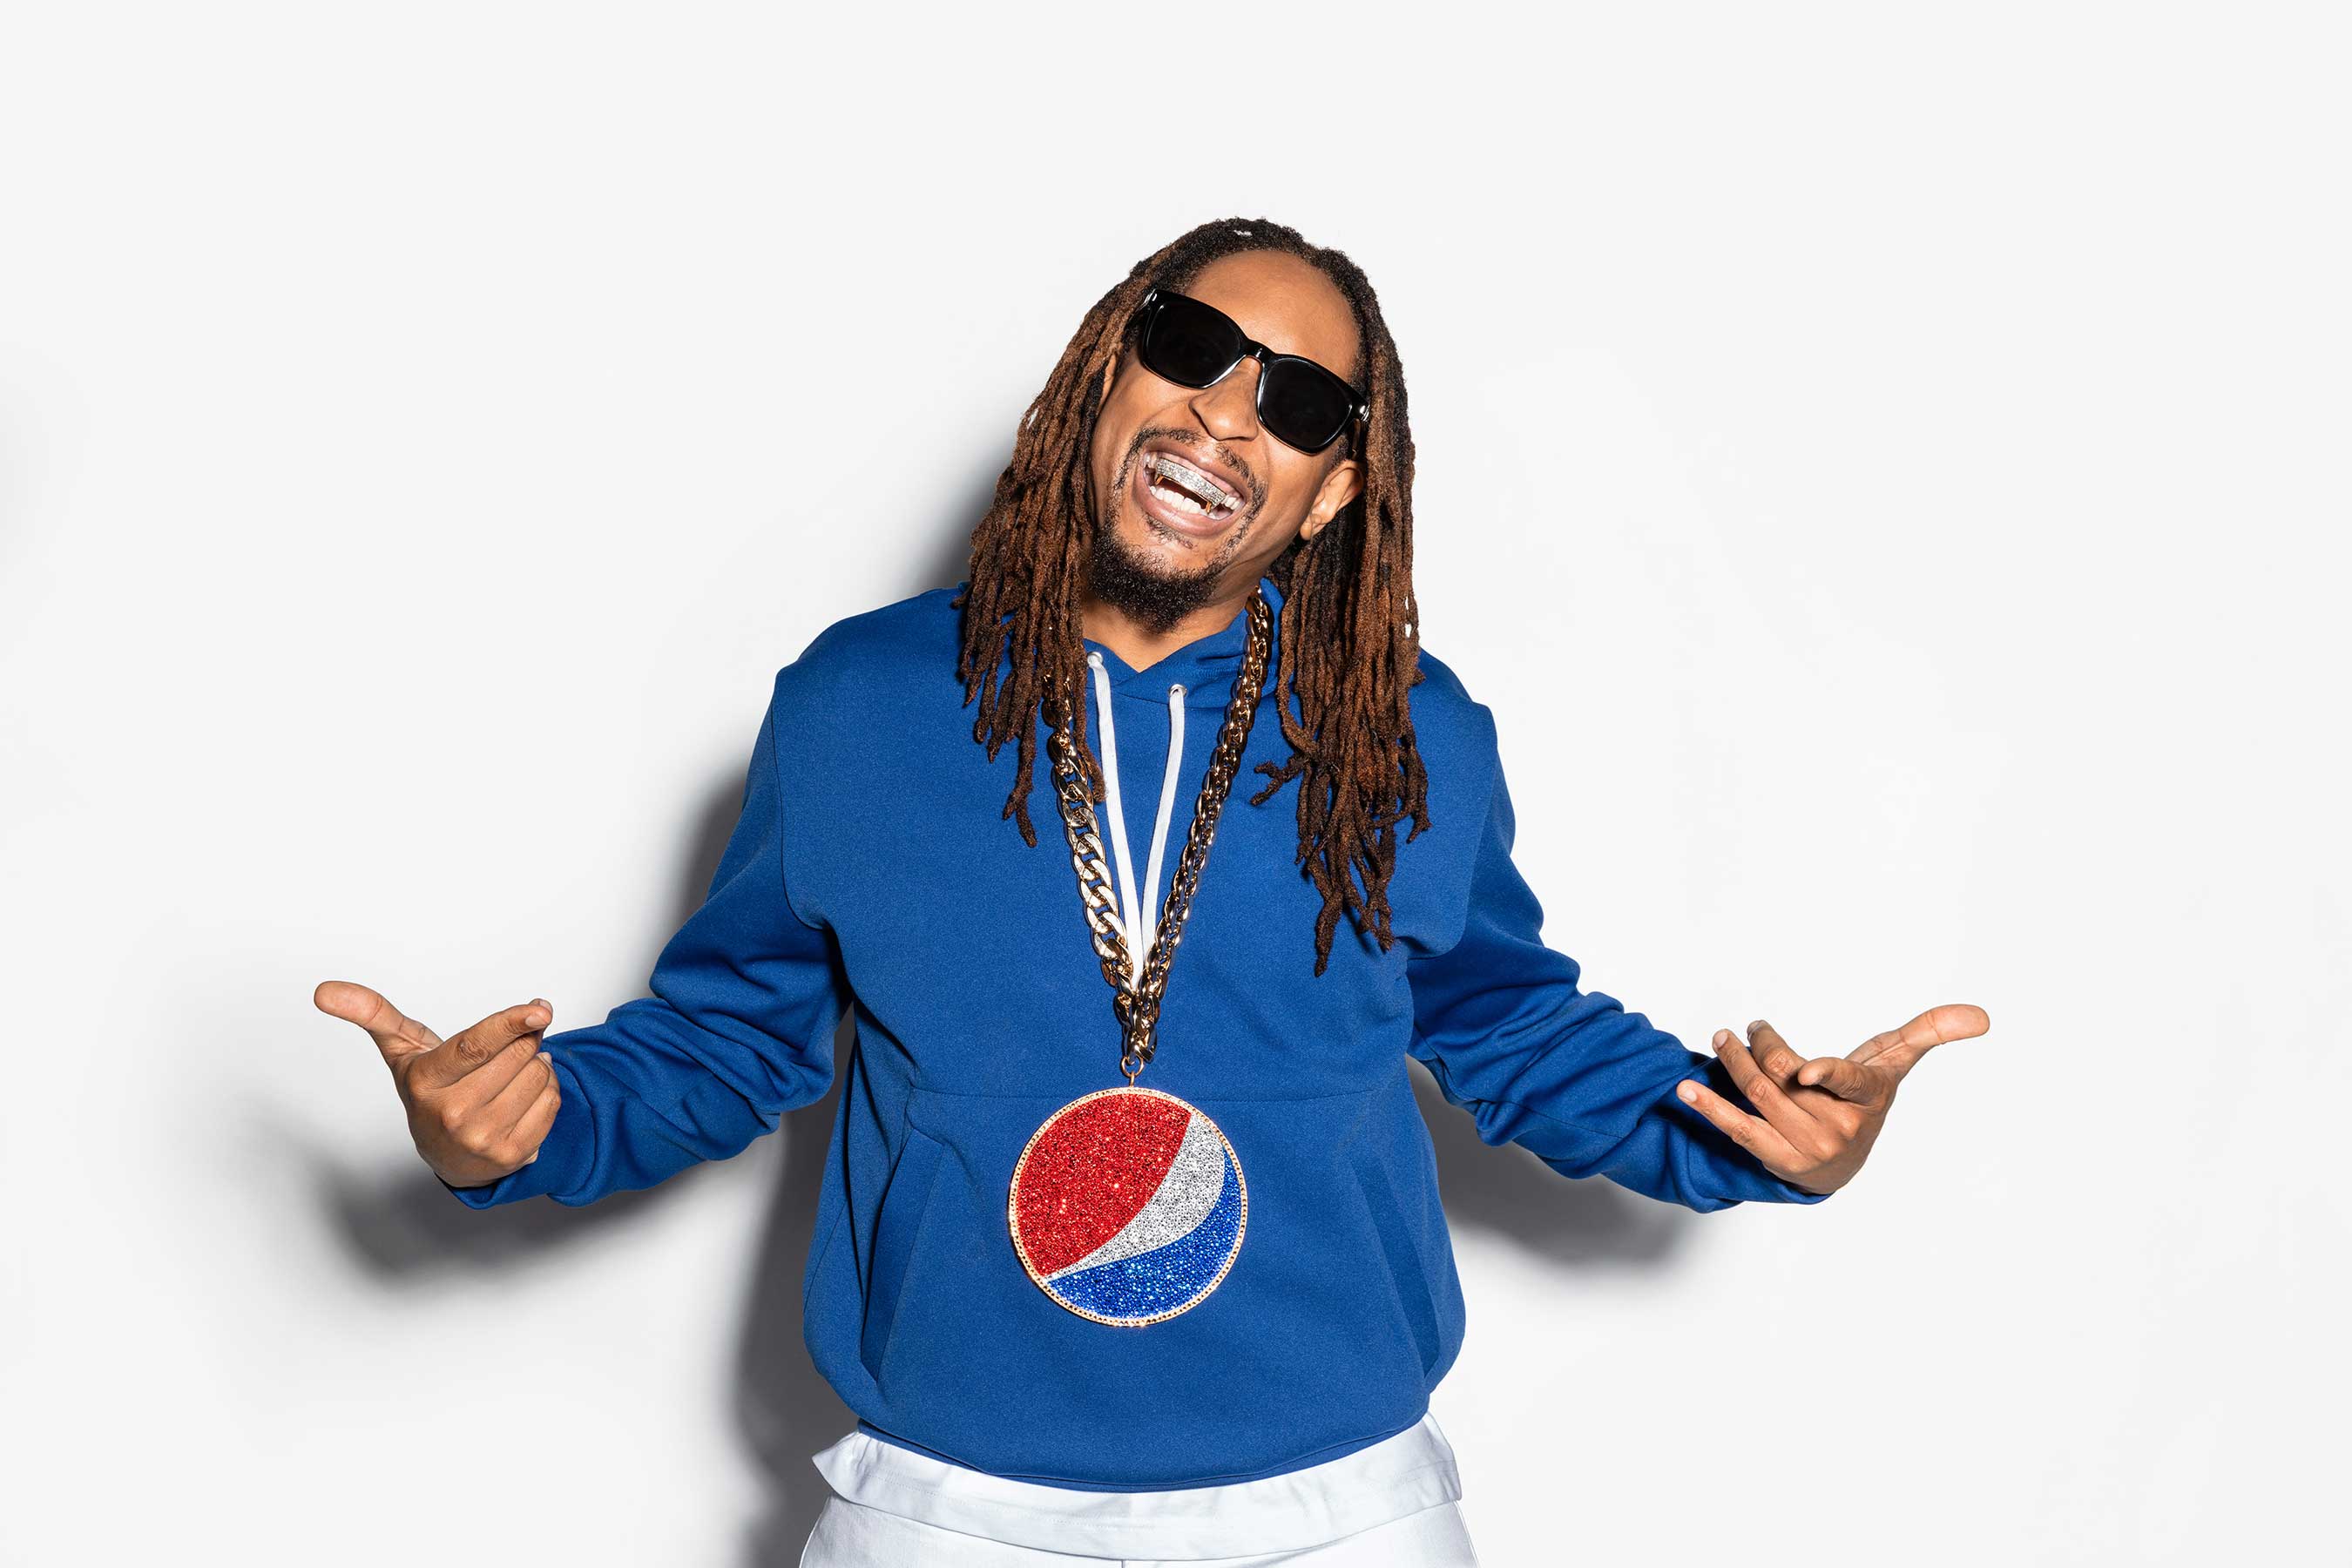 Lil Jon makes a cameo in Pepsi’s “More Than OK” Super Bowl commercial